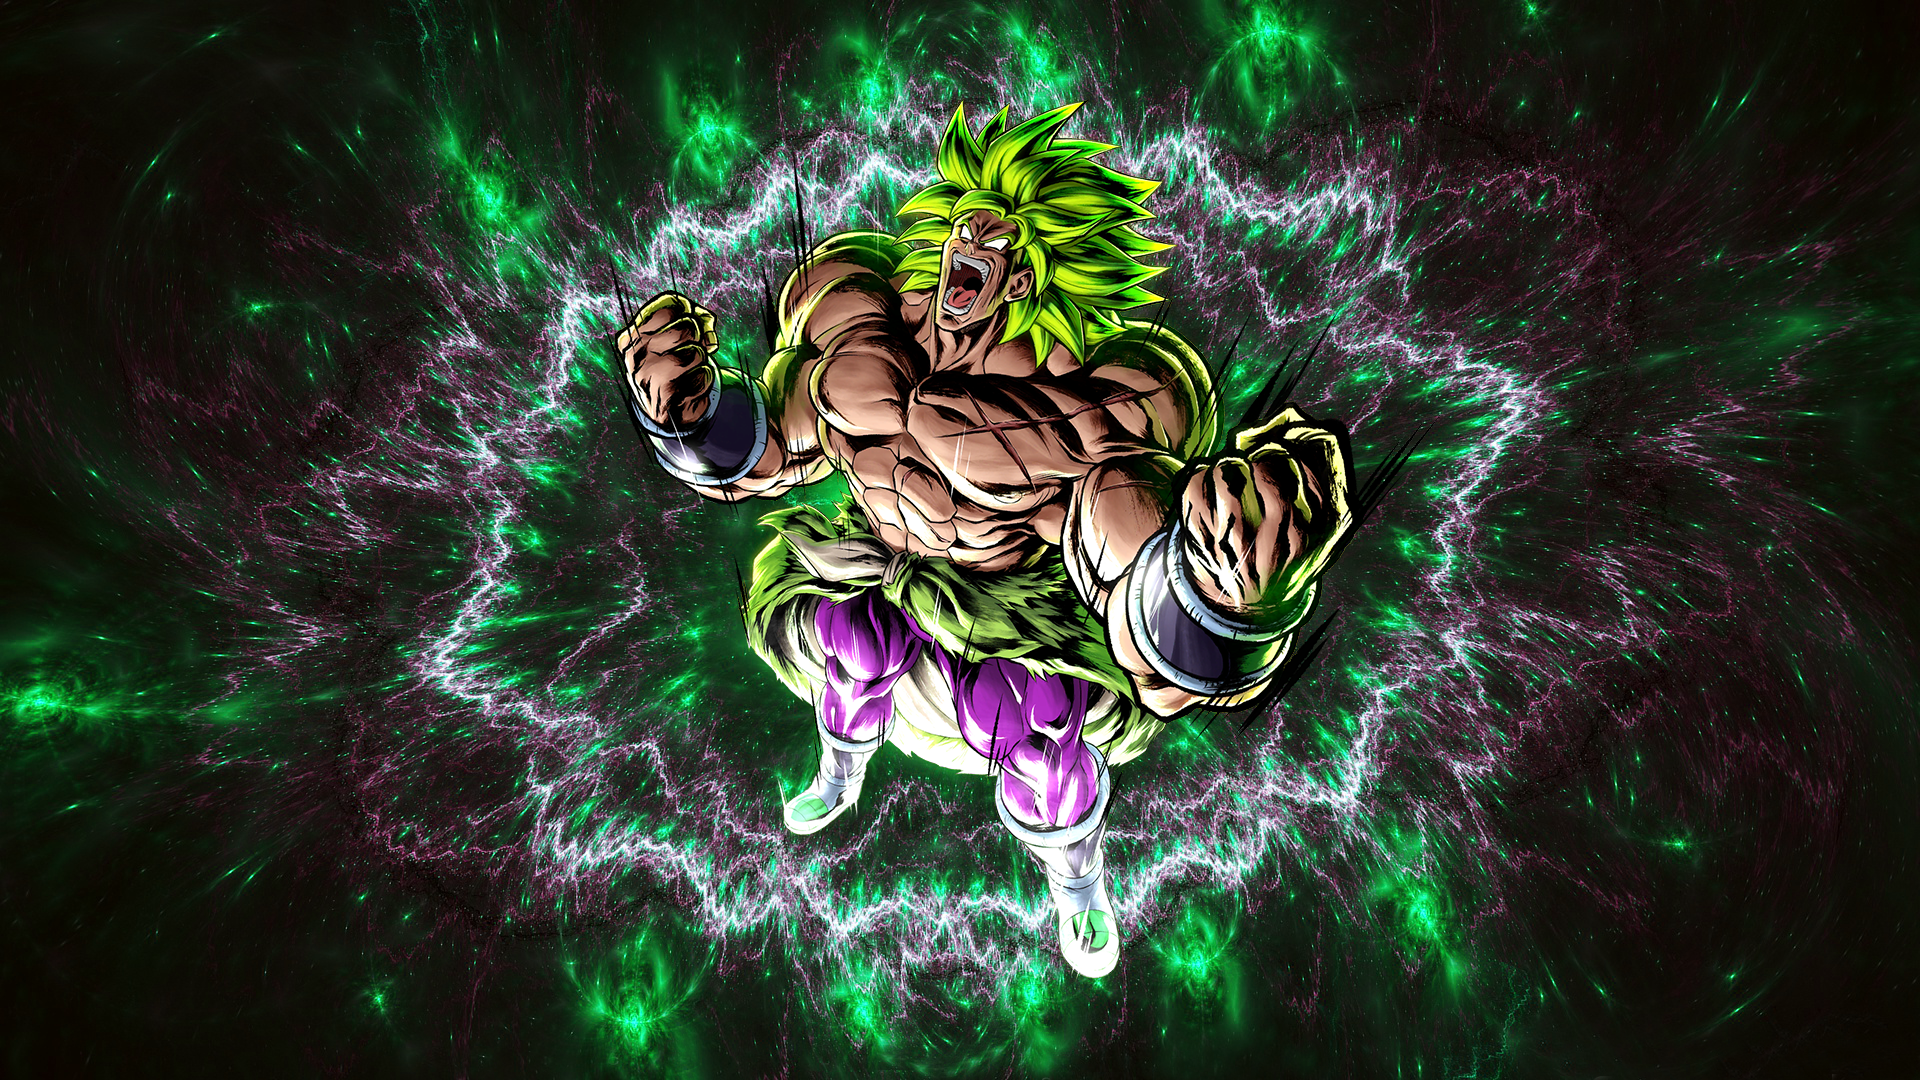 Broly by JC_12